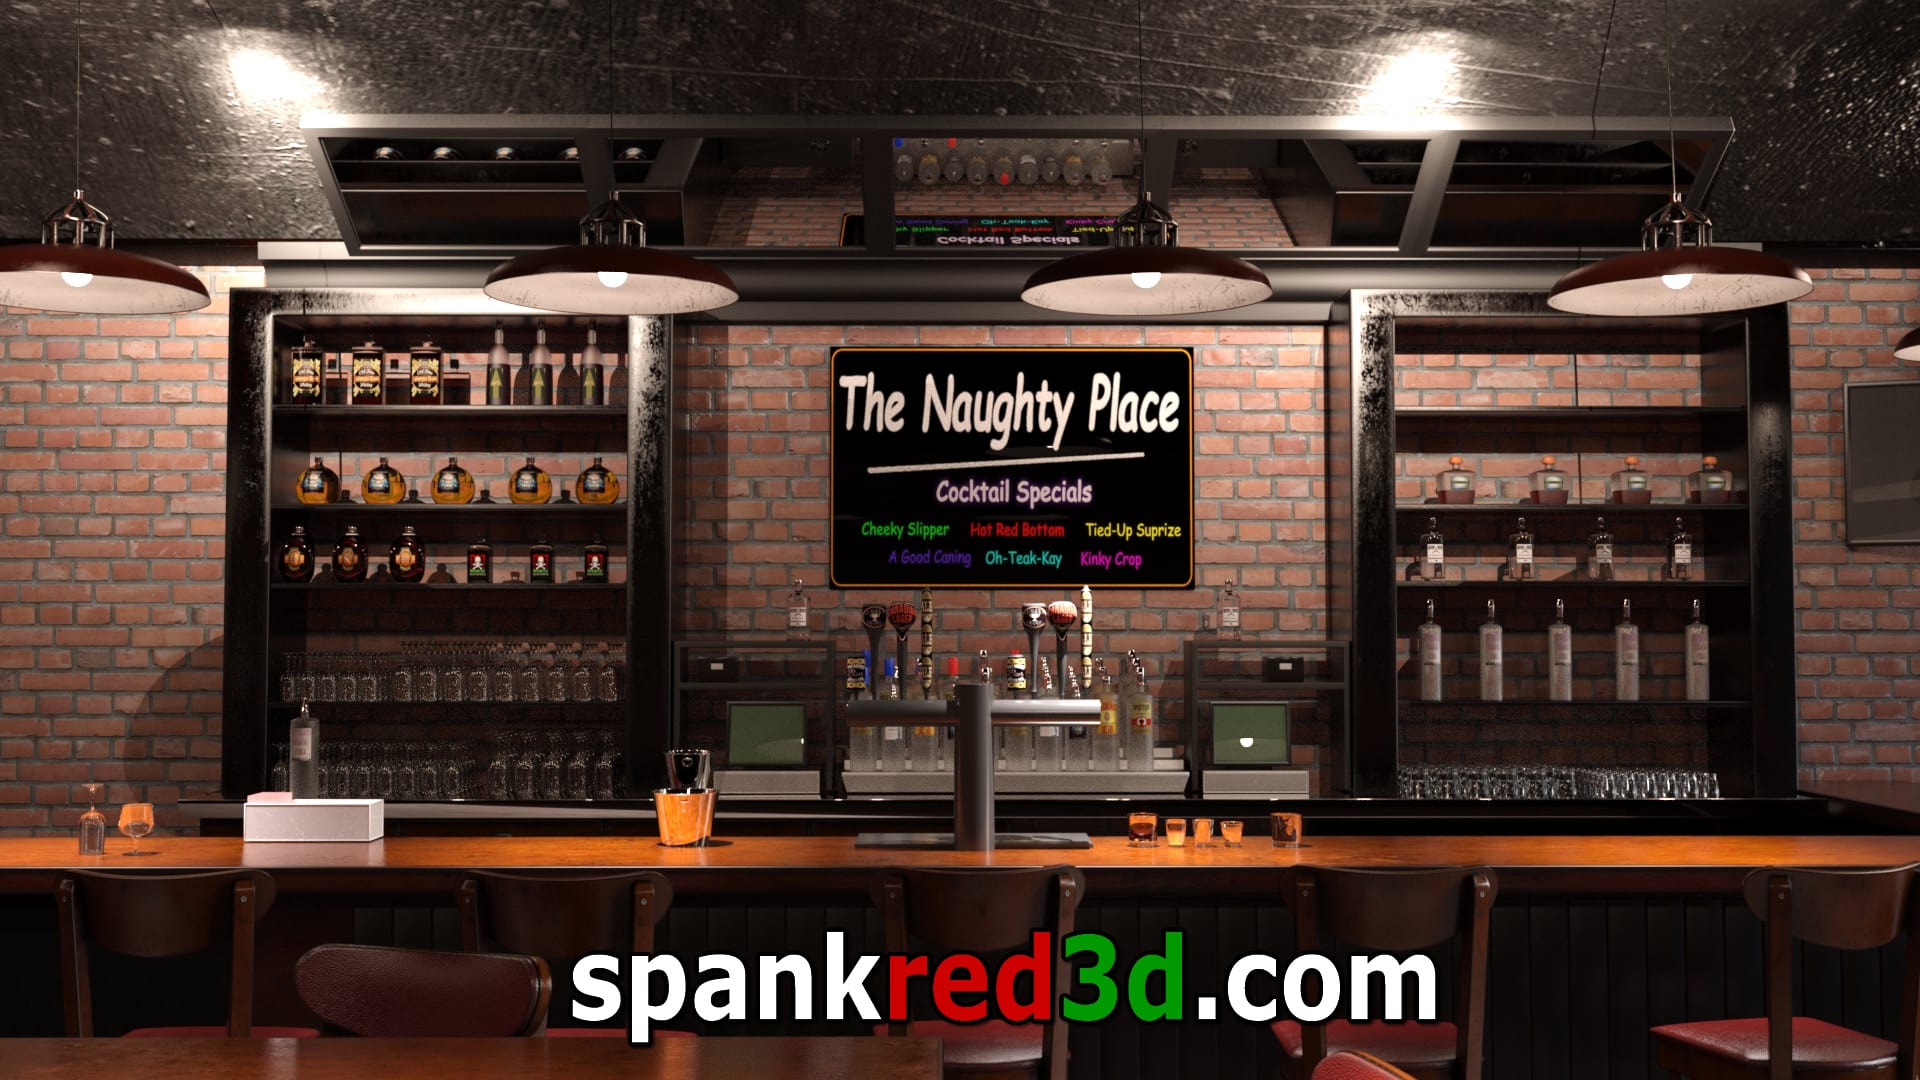 The Naughty bar with saucy waitresses 